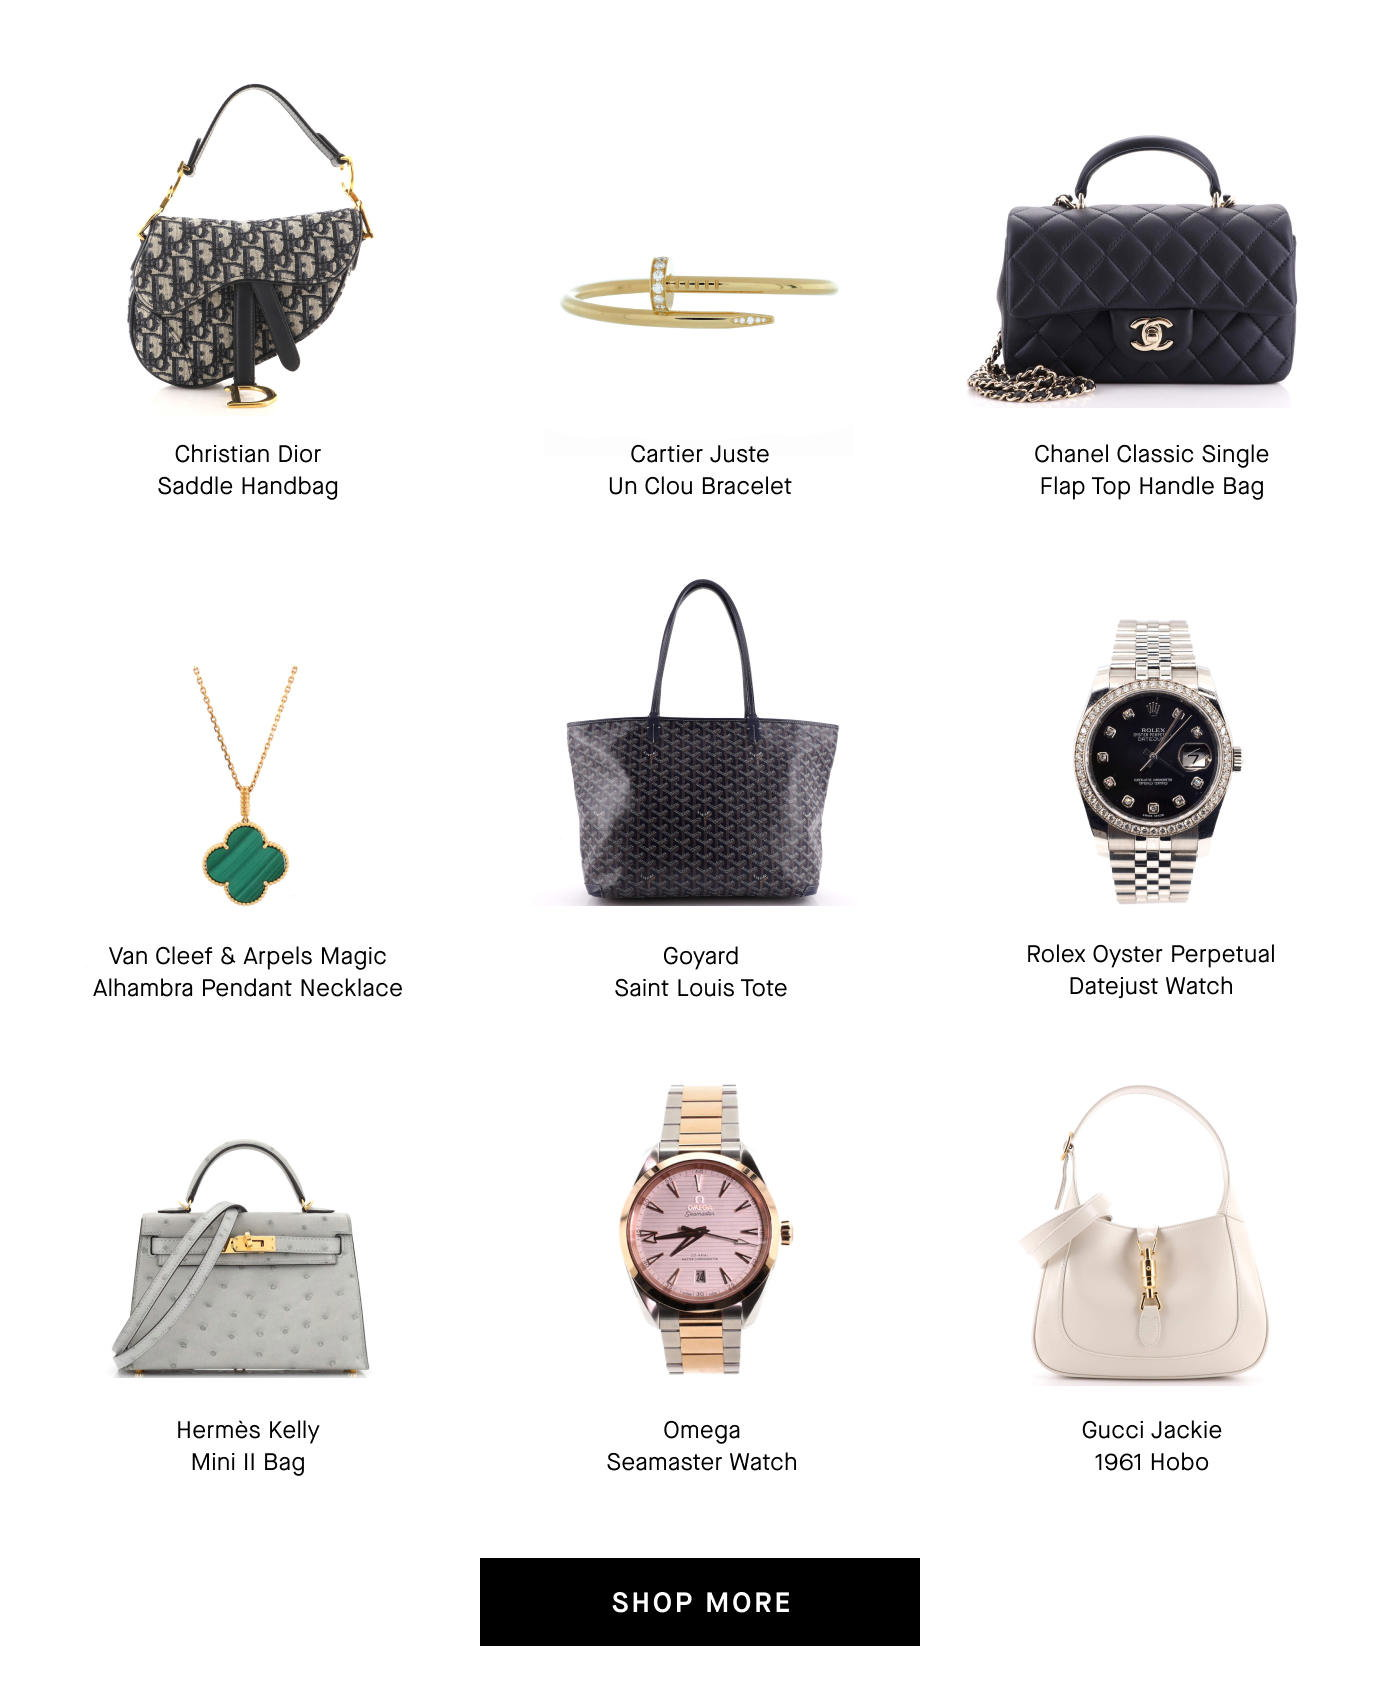 Rebag Infinity Lets Customers Purchase A Handbag, And Trade It In For A New  One Seasonally